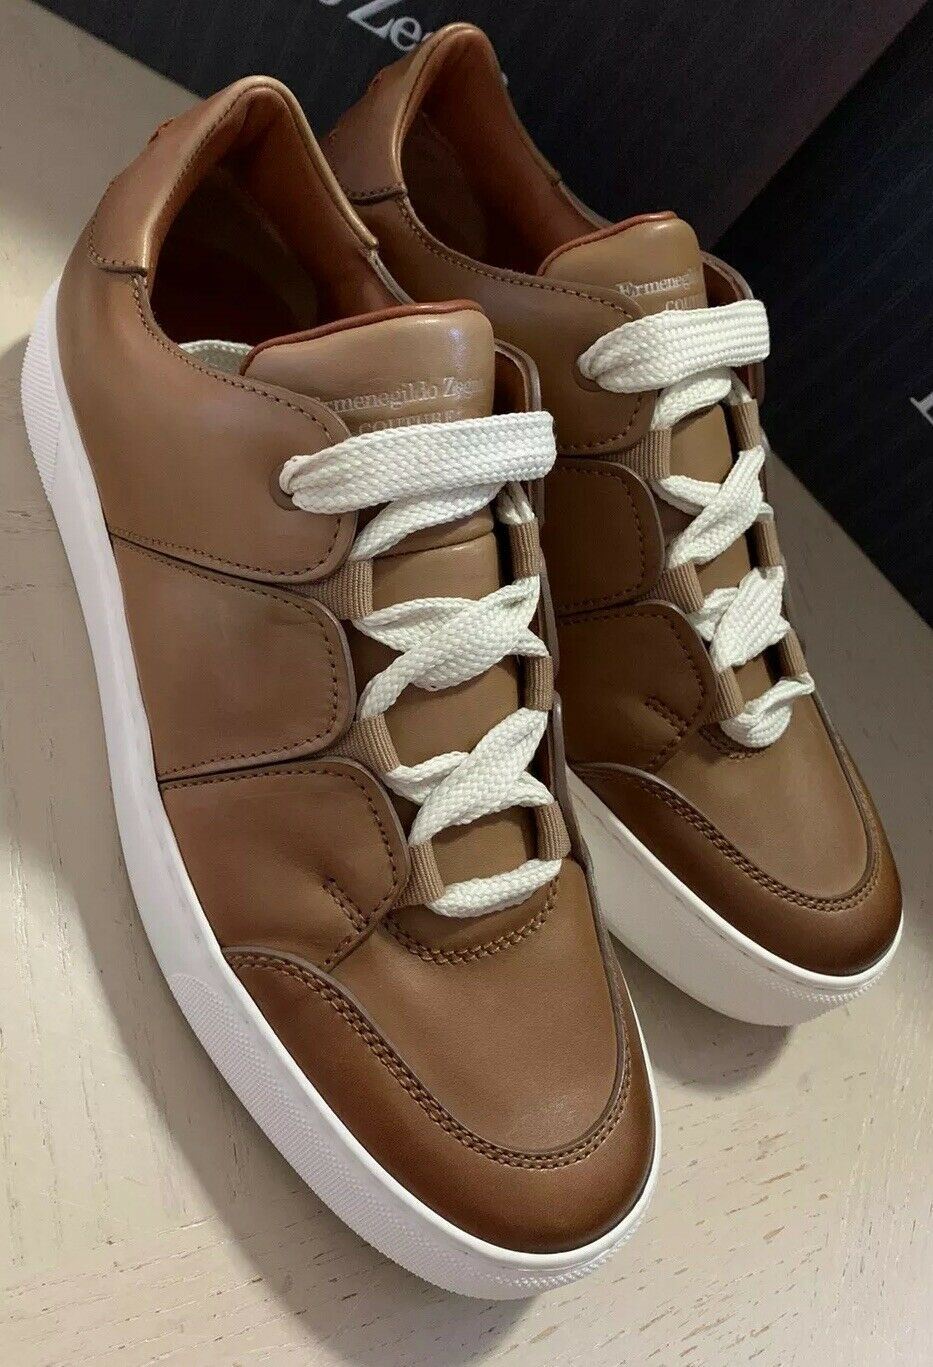 New $795 Ermenegildo Zegna Couture Leather Sneakers Shoes MD Beige 9.5 US